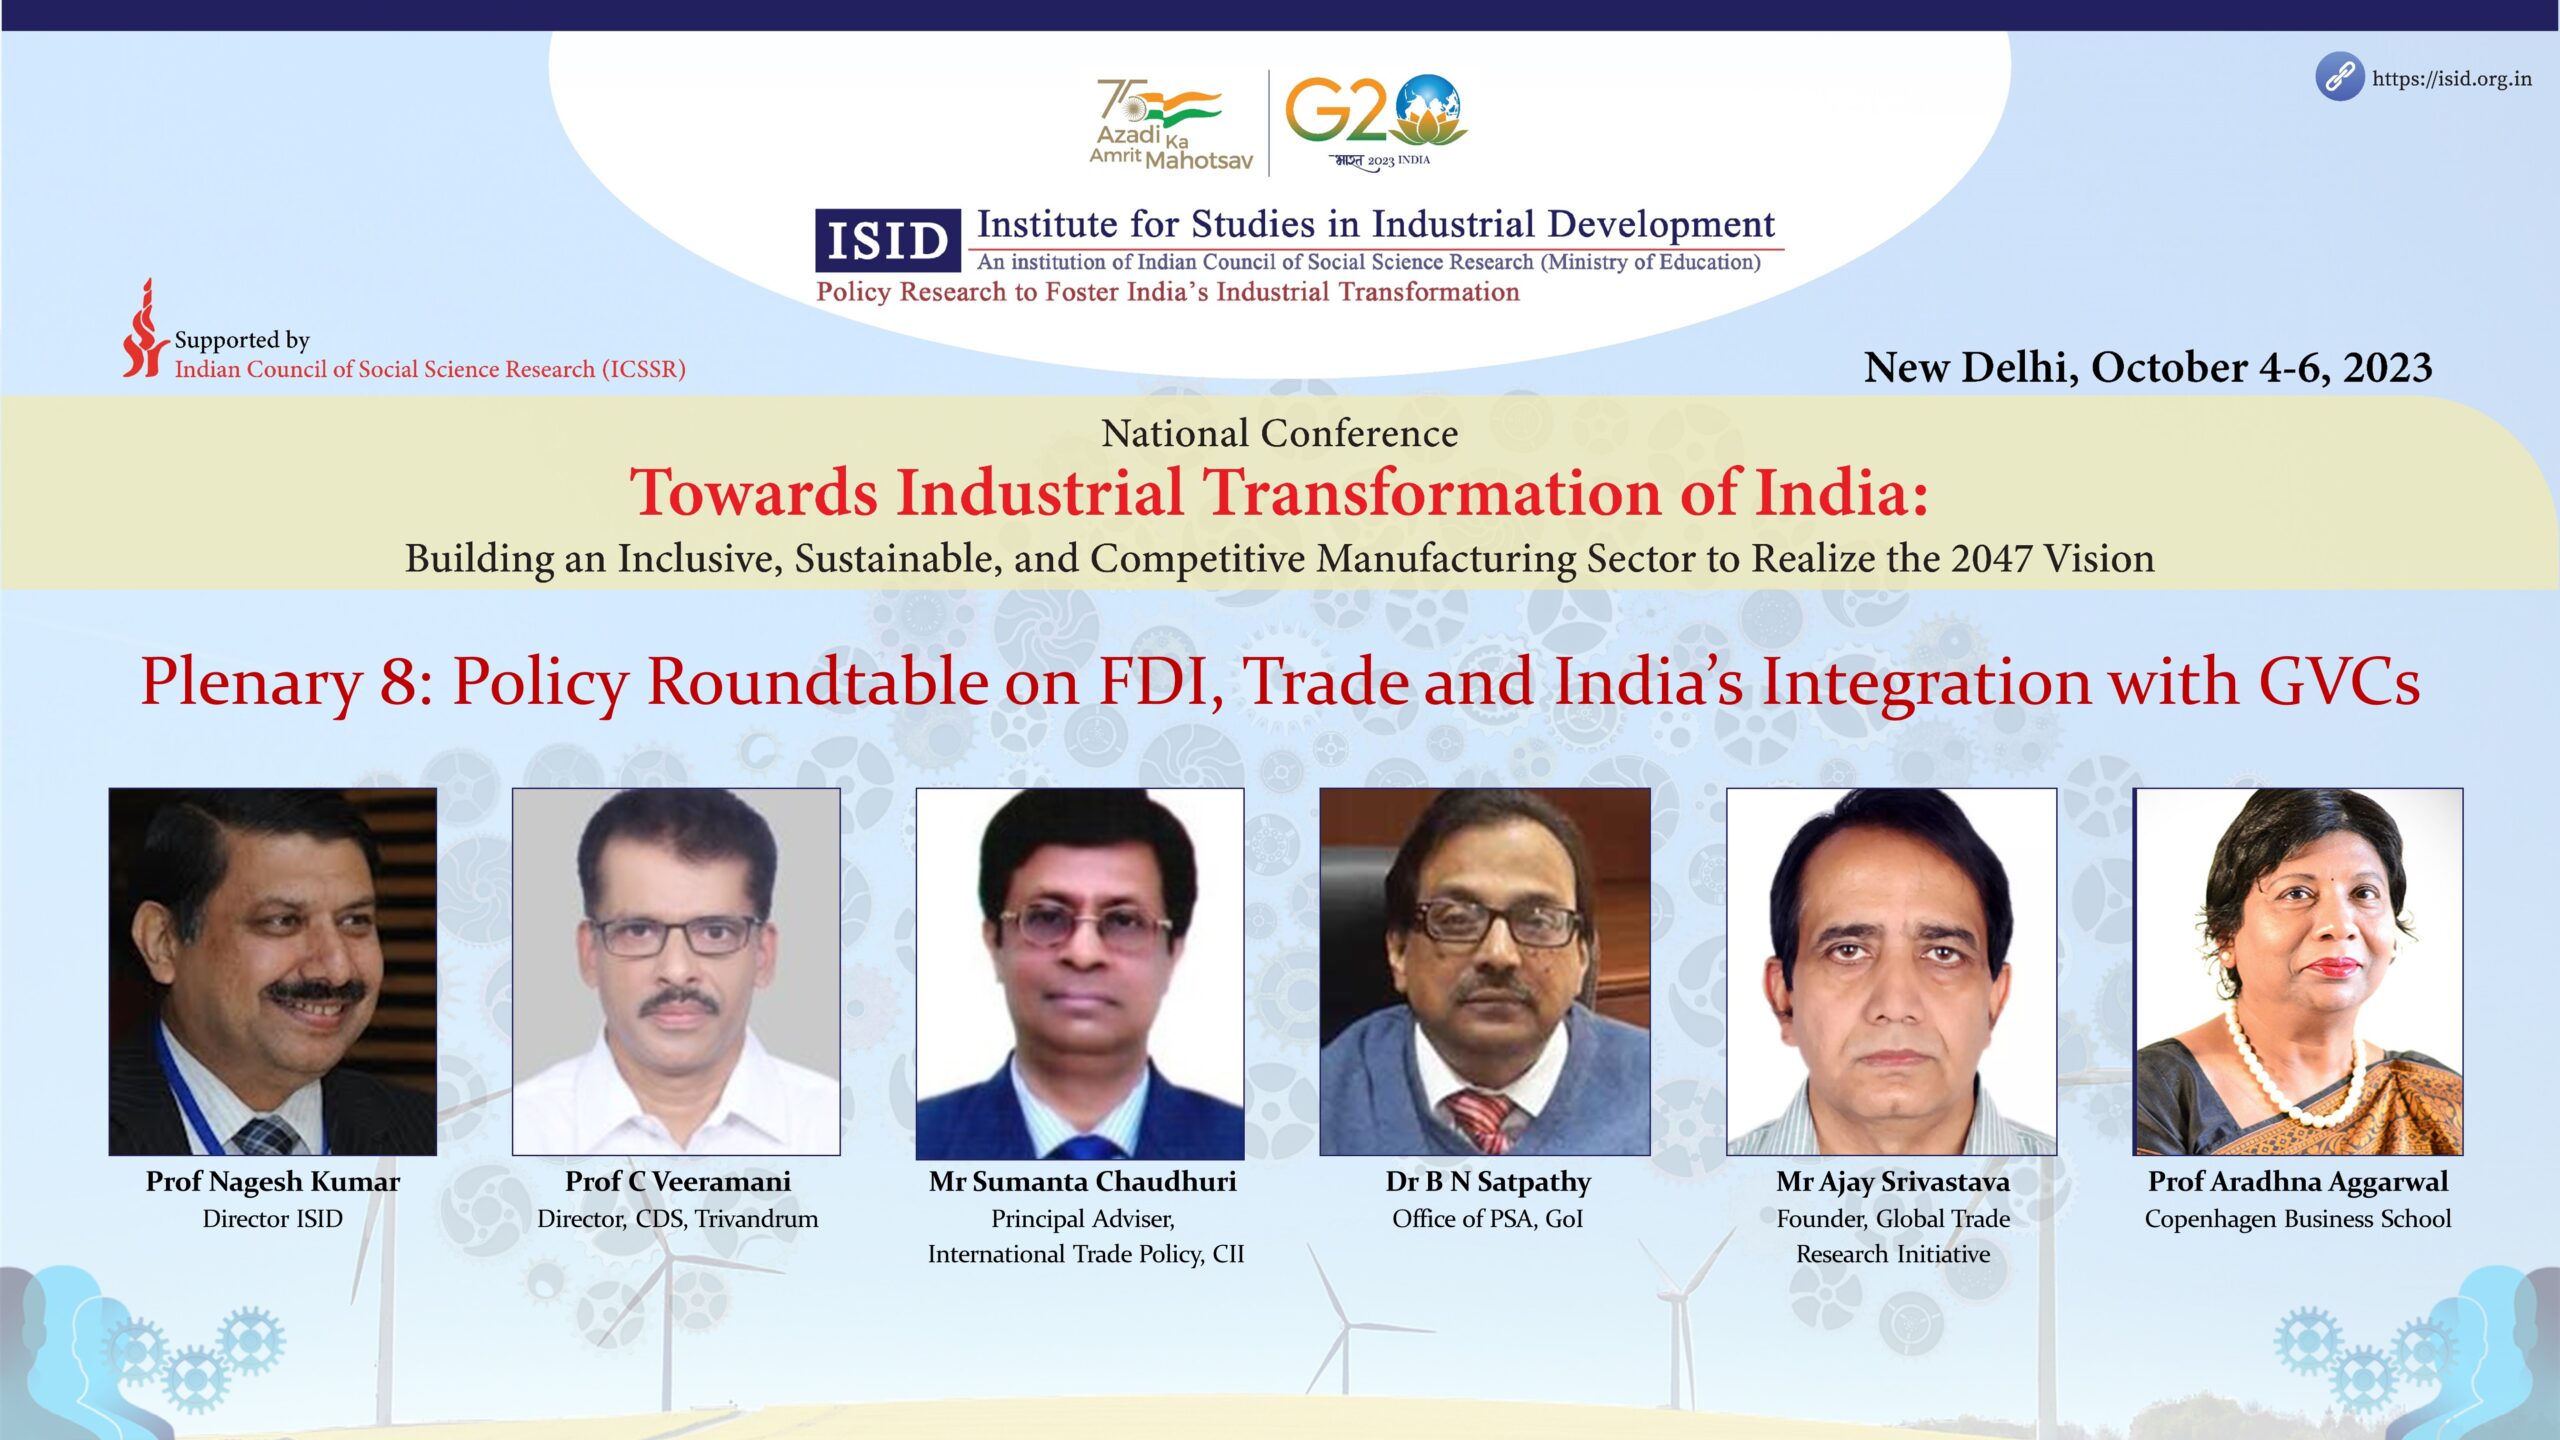 Plenary Session 8: Policy Roundtable on FDI, Trade and India’s Integration with GVCs